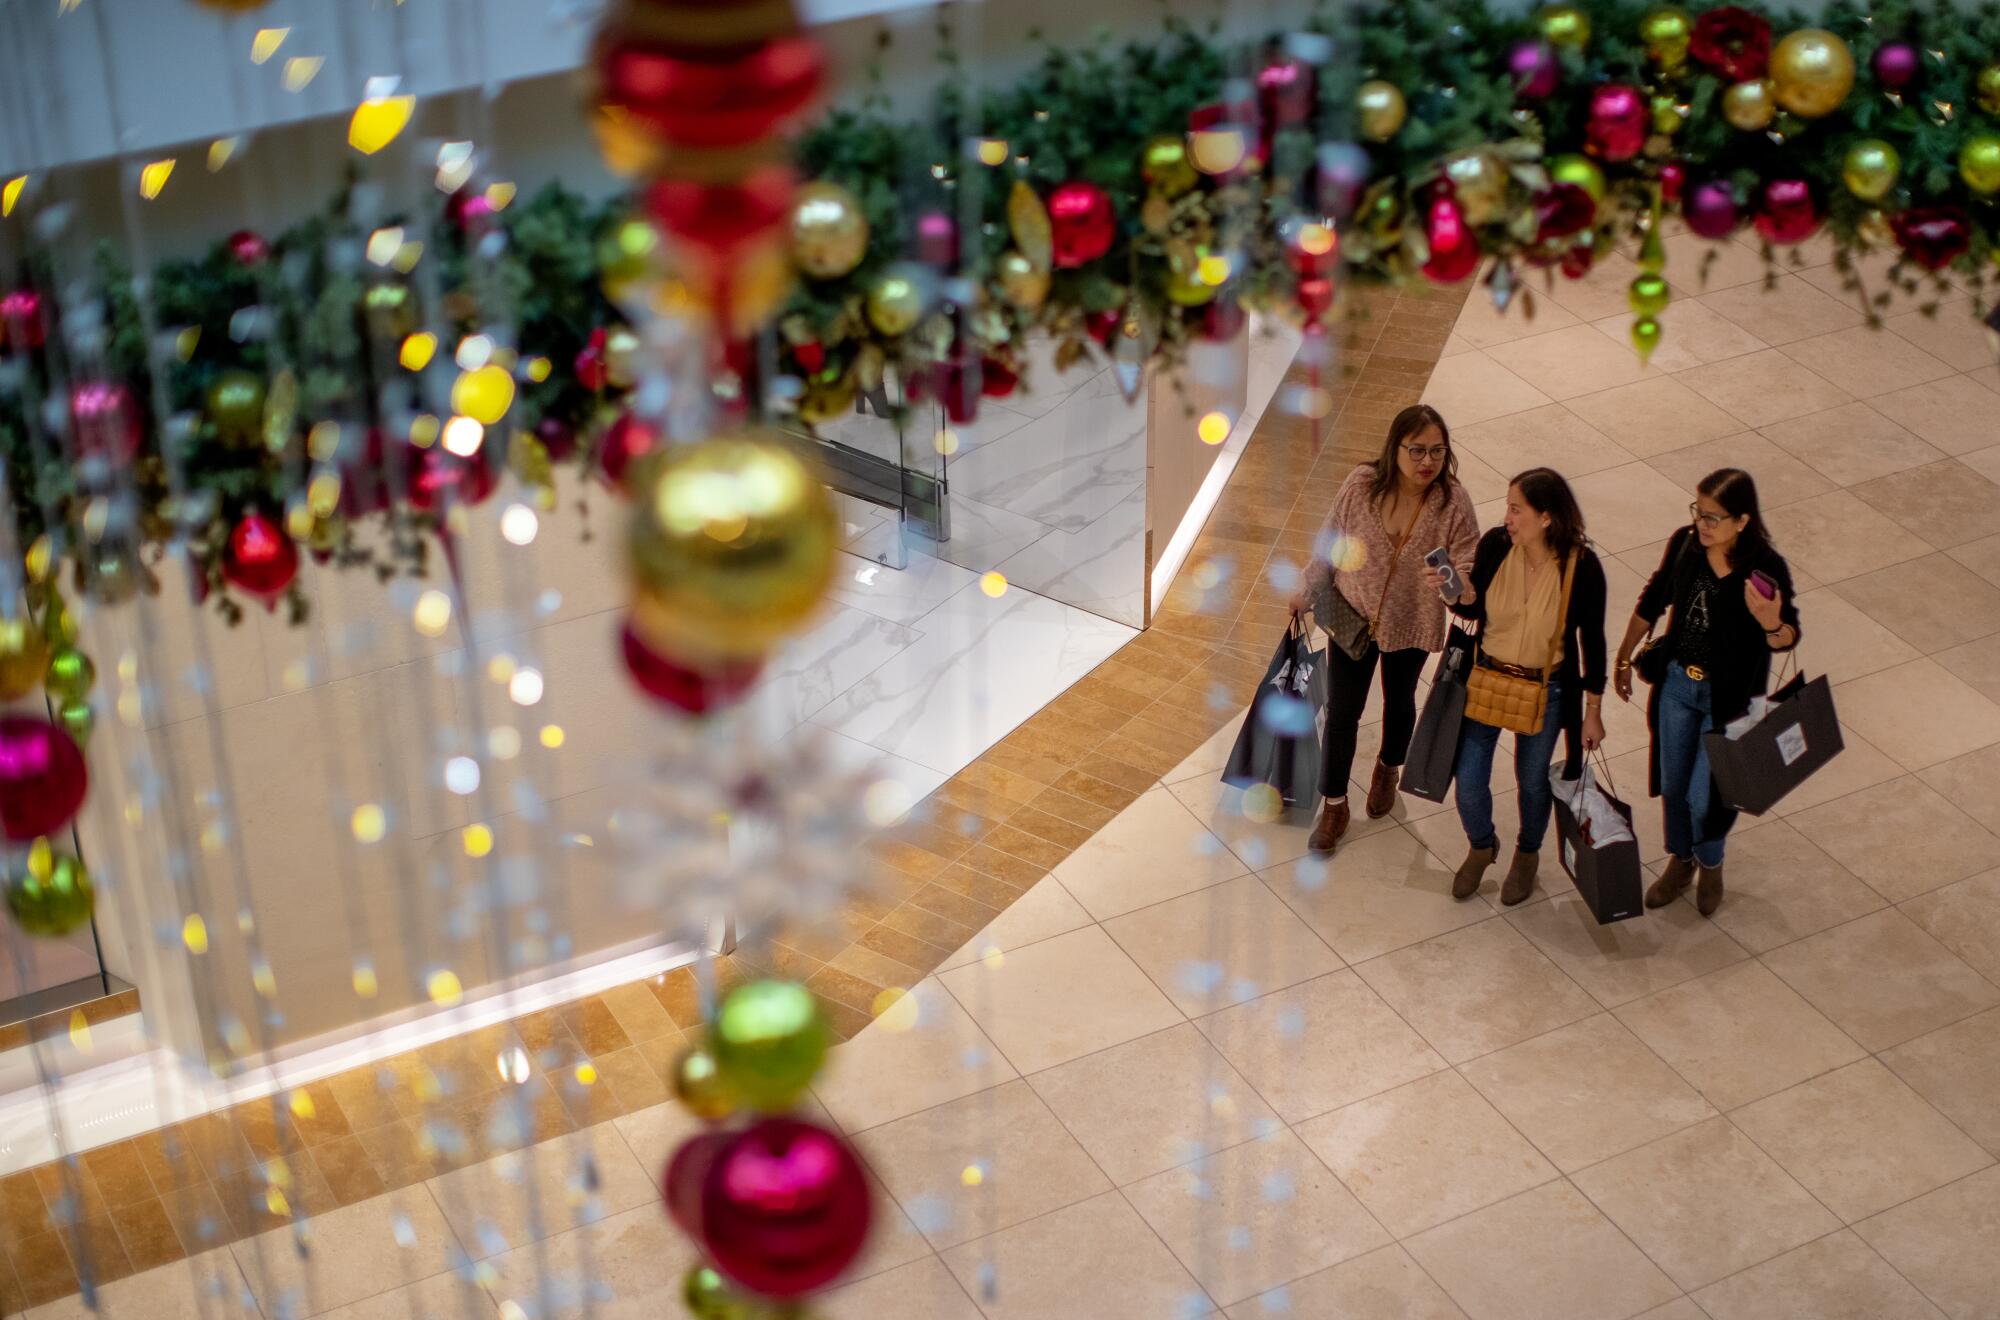 Black Friday shoppers are treated to festive decorations throughout South Coast Plaza.